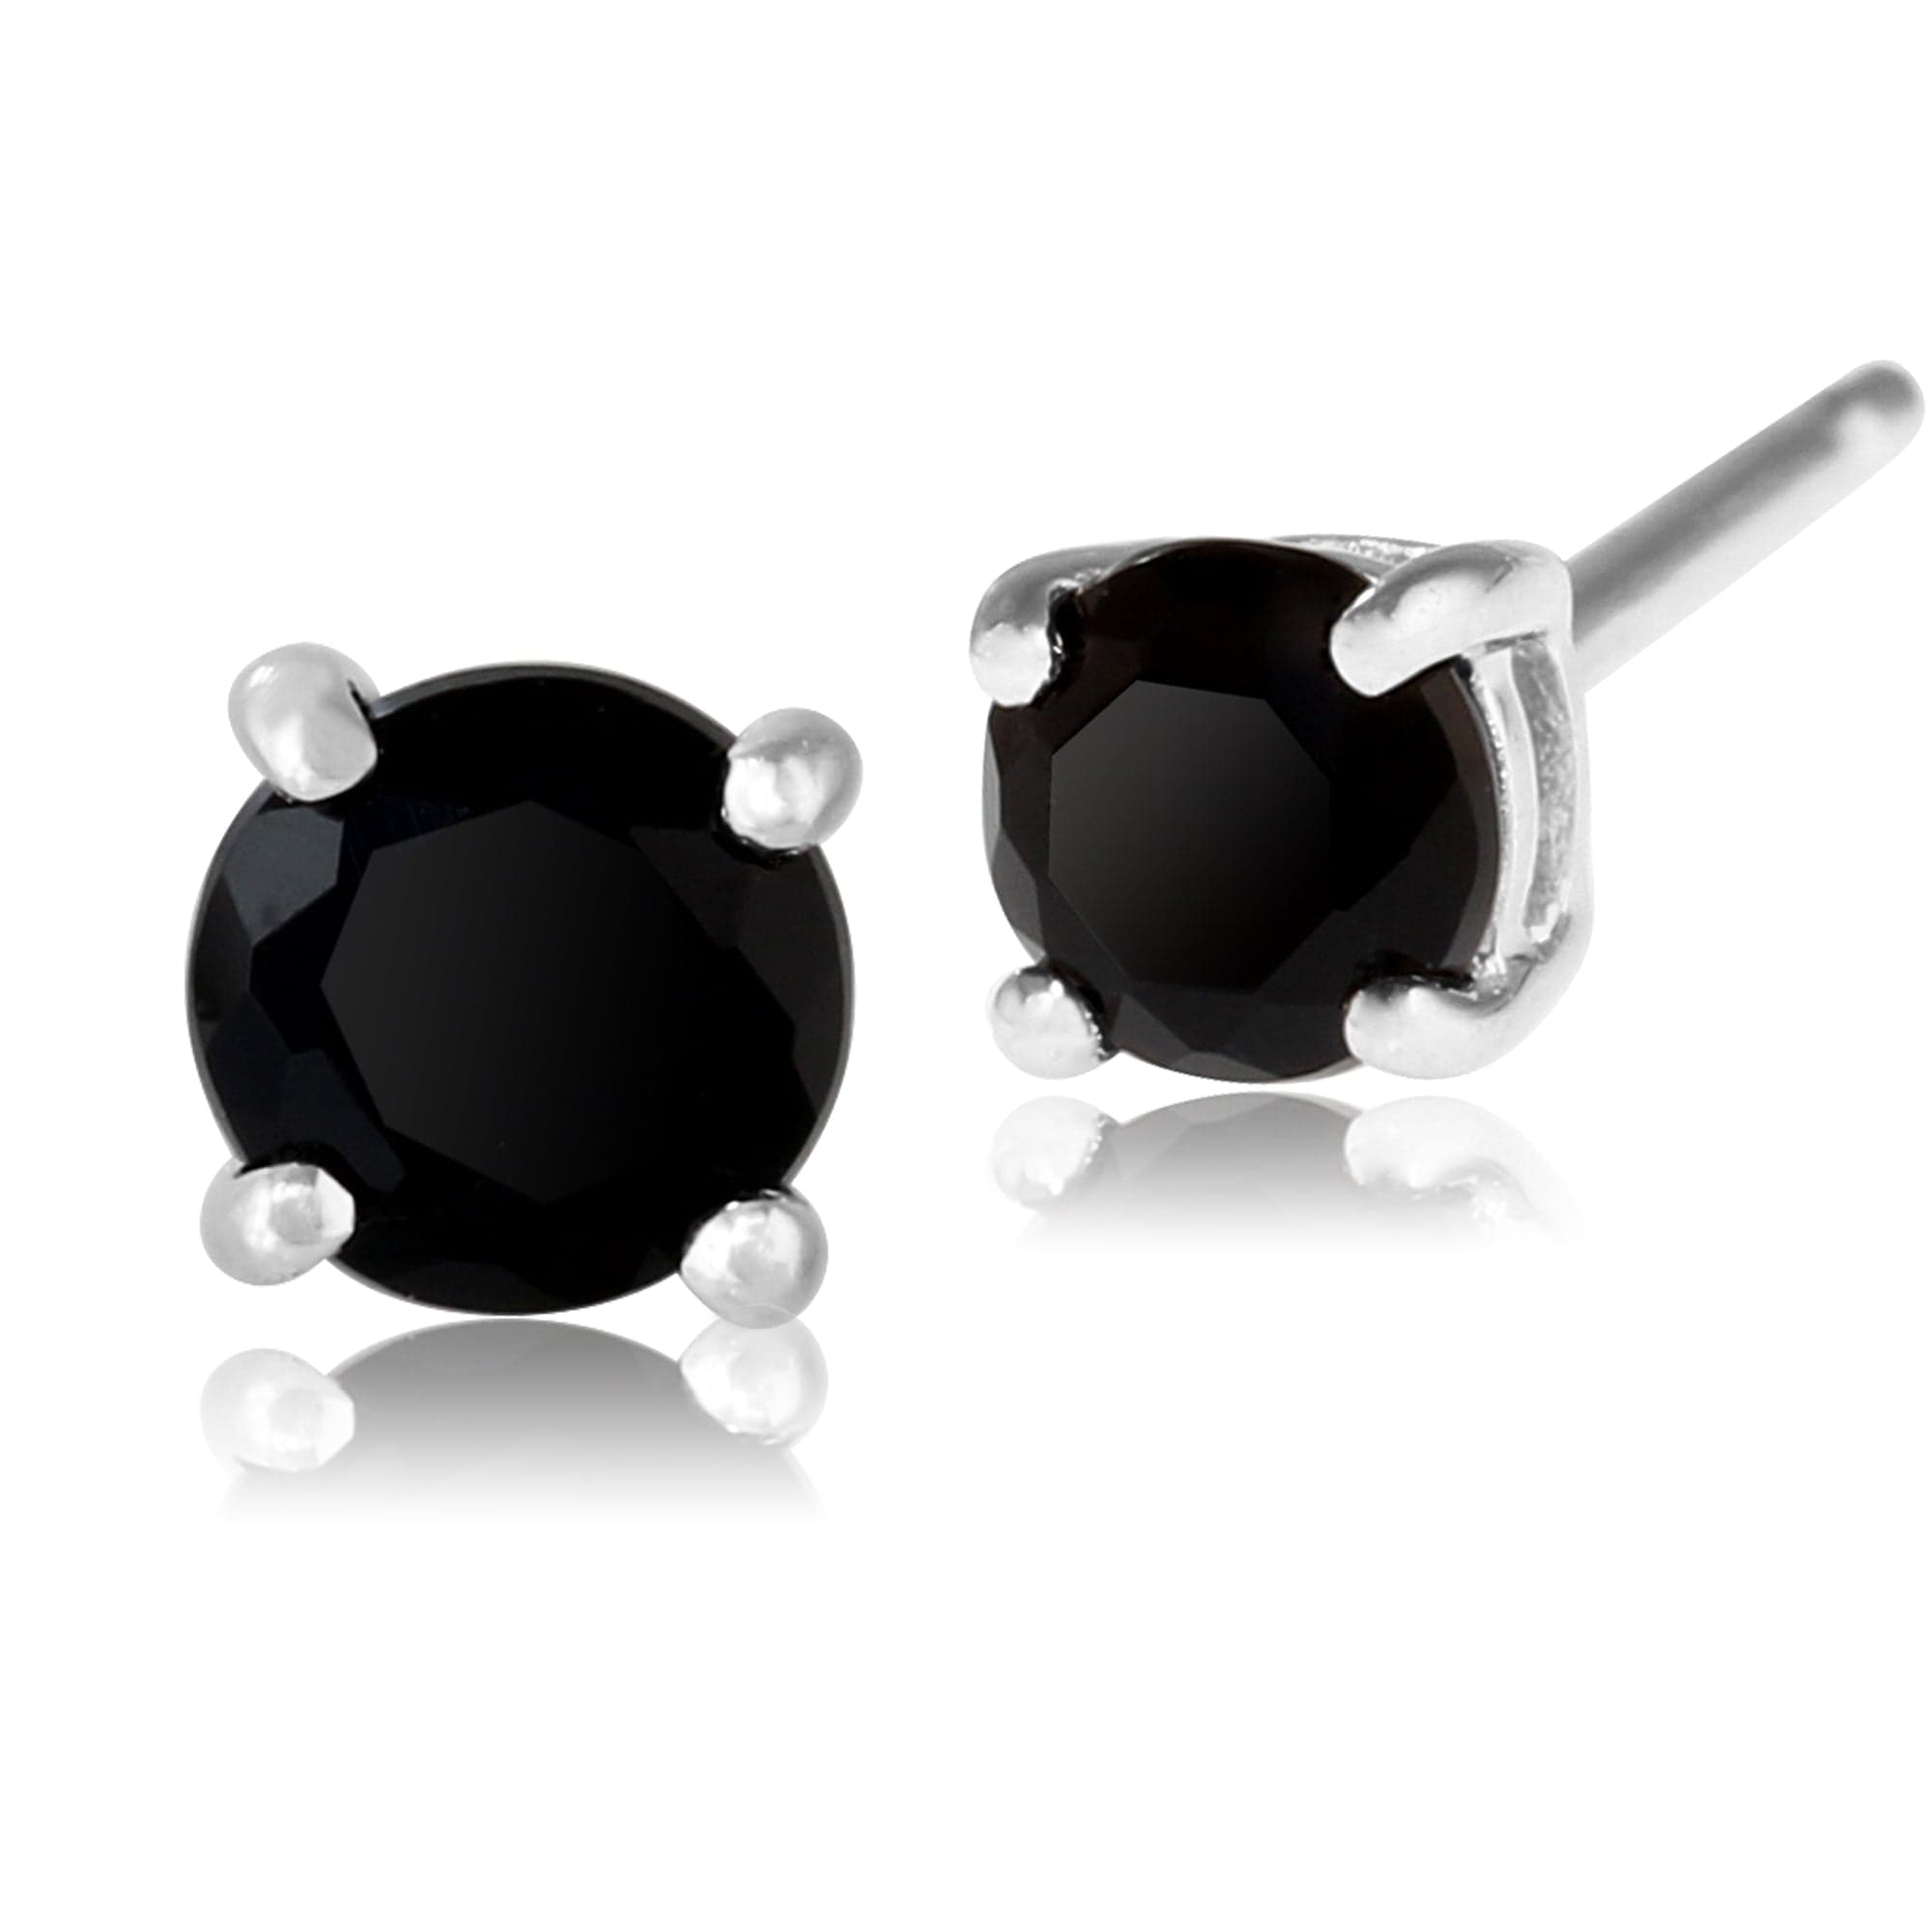 9ct White Gold Black Onyx Stud Earrings with Detachable Diamond Halo Ear Jacket in 9ct Yellow Gold - Gemondo